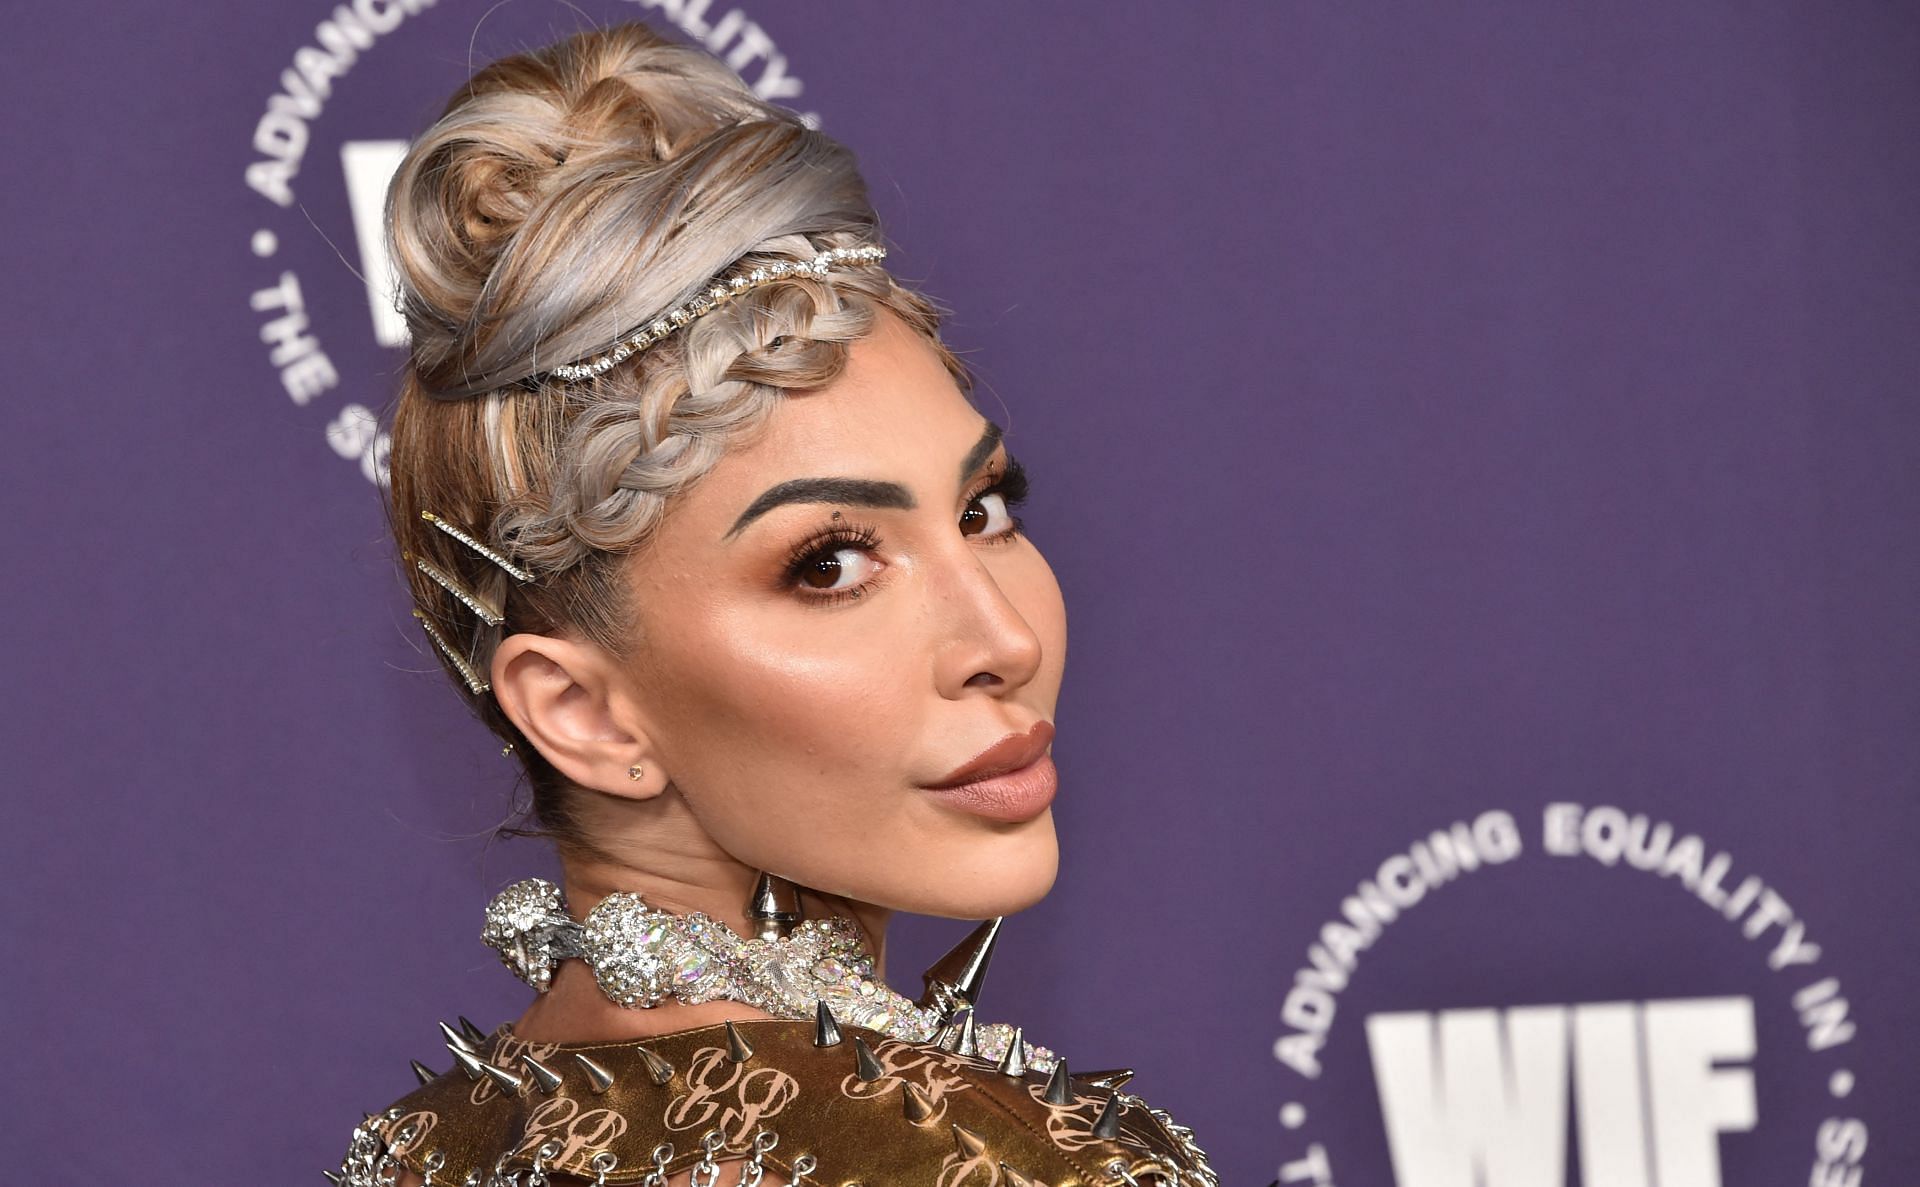 Farrah Abraham was taken into custody for allegedly assaulting a security guard in a Hollywood-based club (Image via Getty Images/Chris Delmas/AFP)